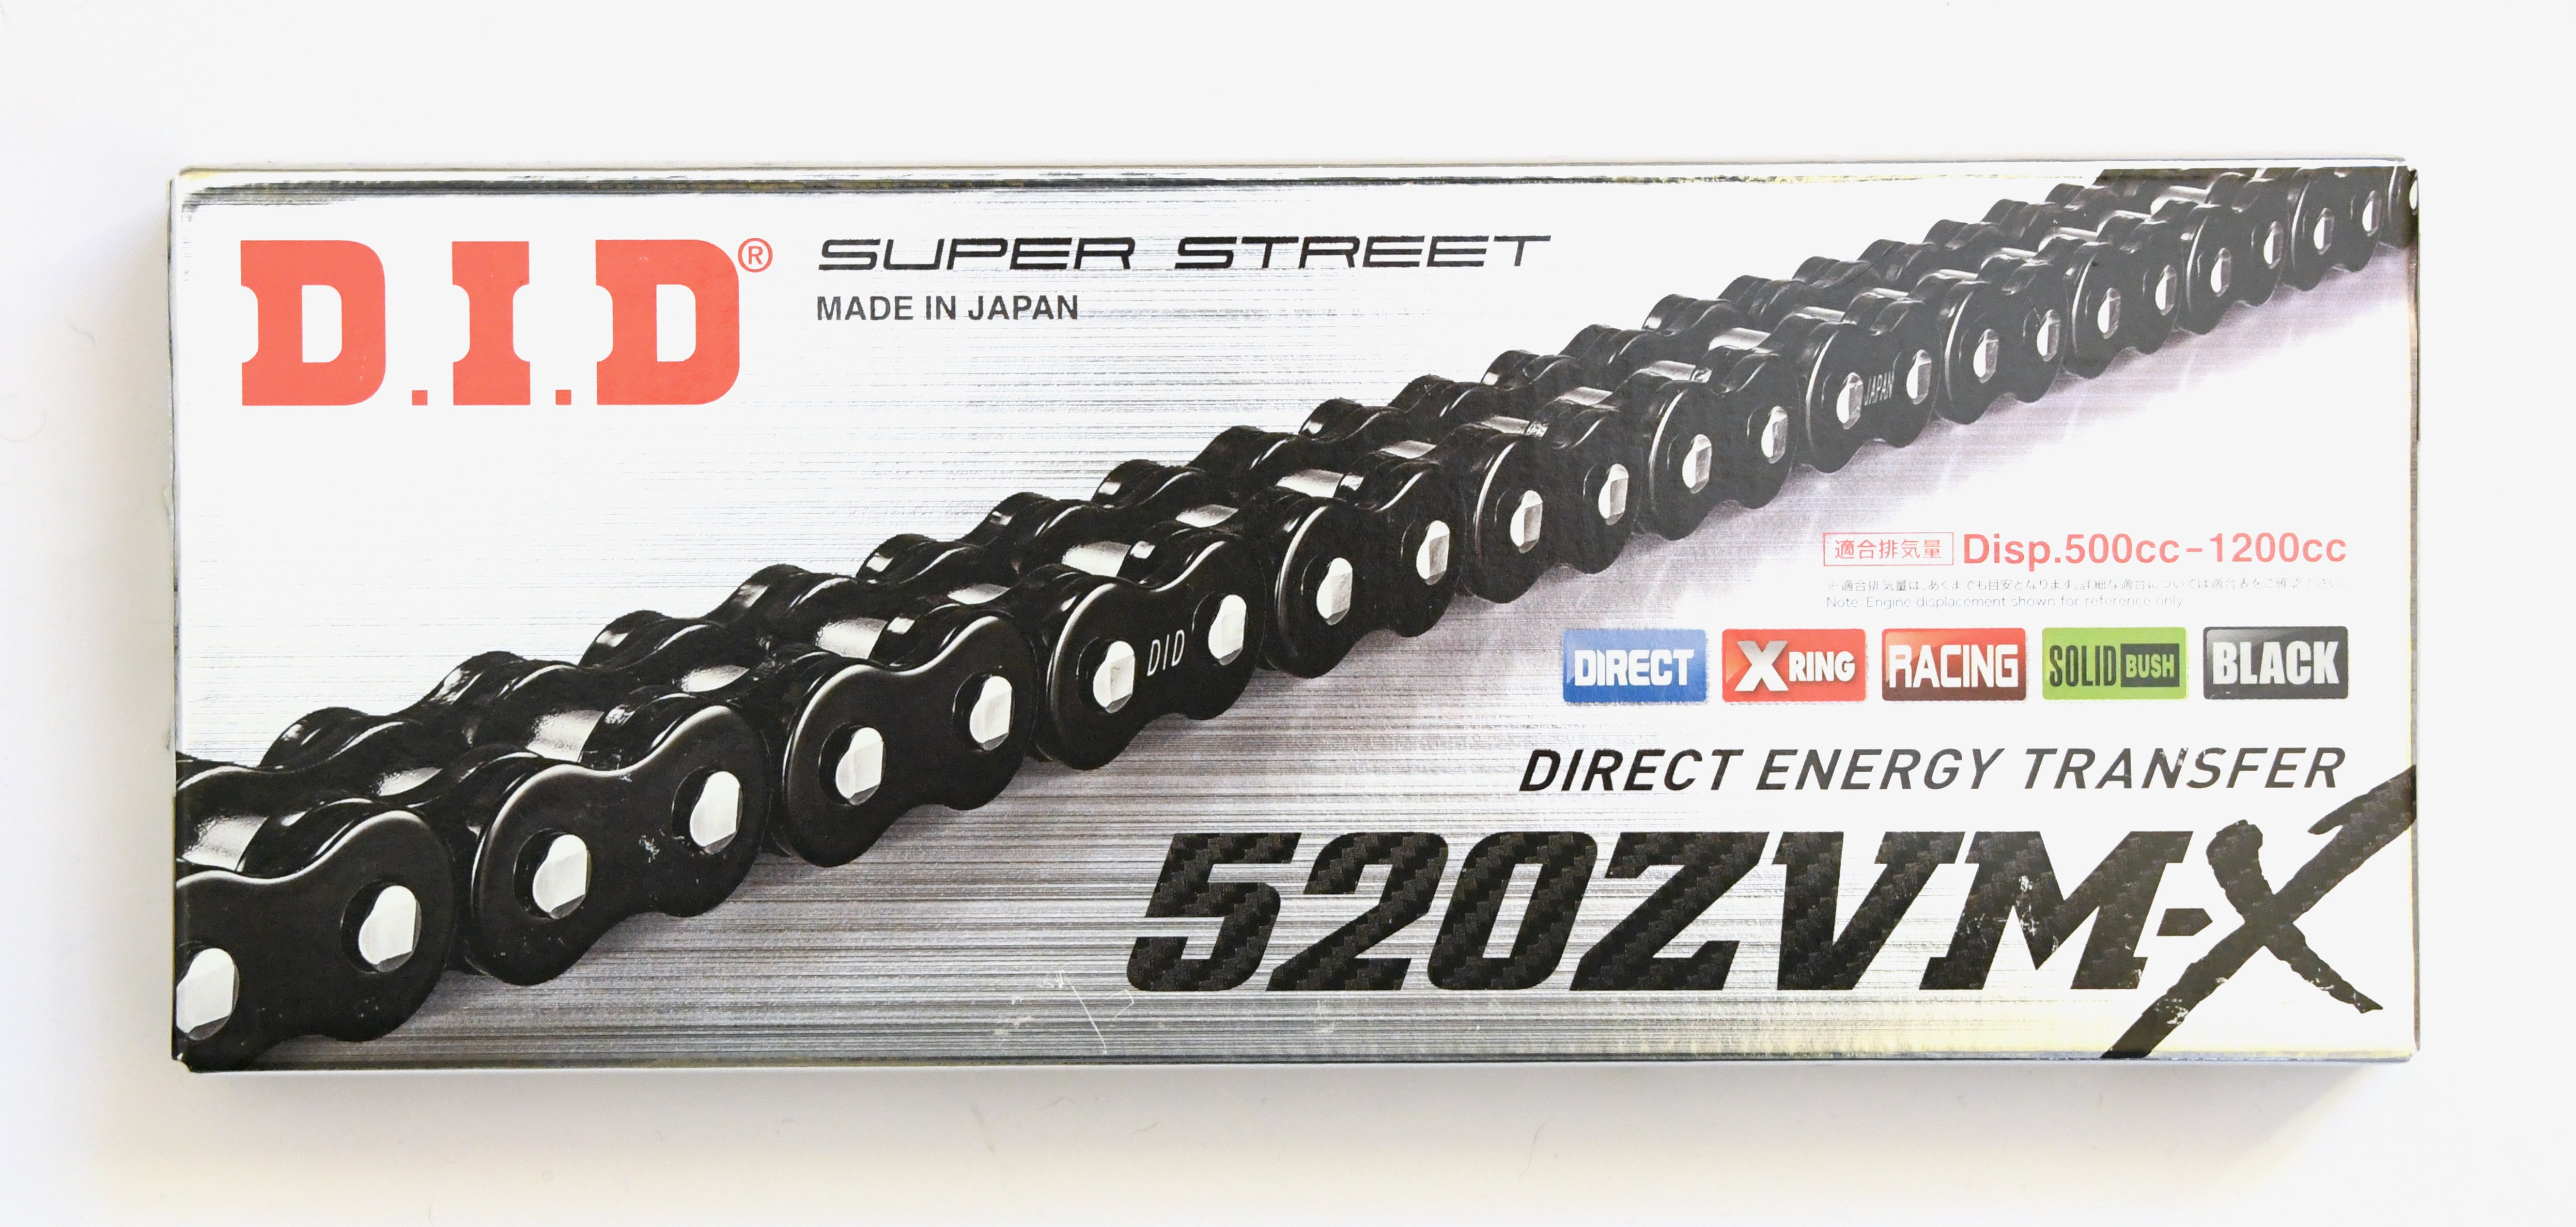 520 Pitch 118 Link Chain - Choose Your Chain (800cc+ Models)